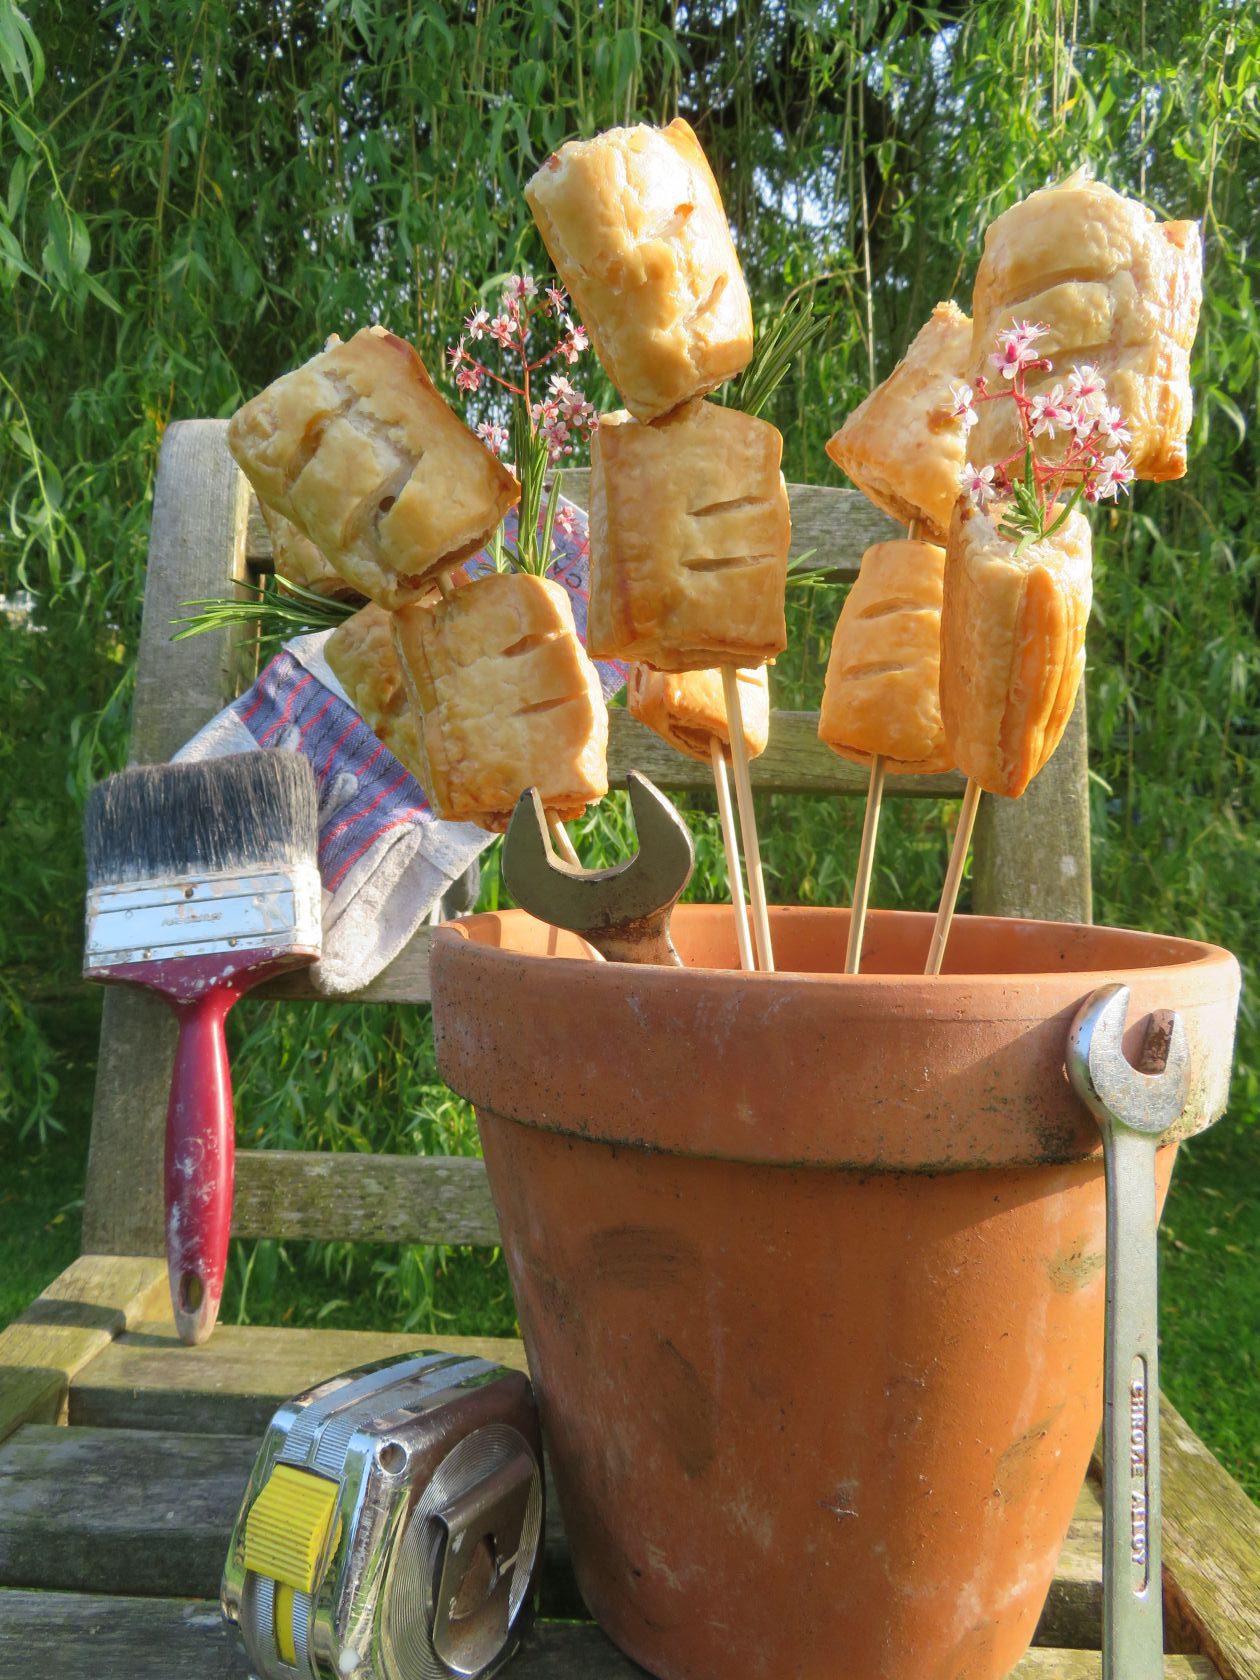 Bouquet of sausage rolls'ies from Thomas the Baker